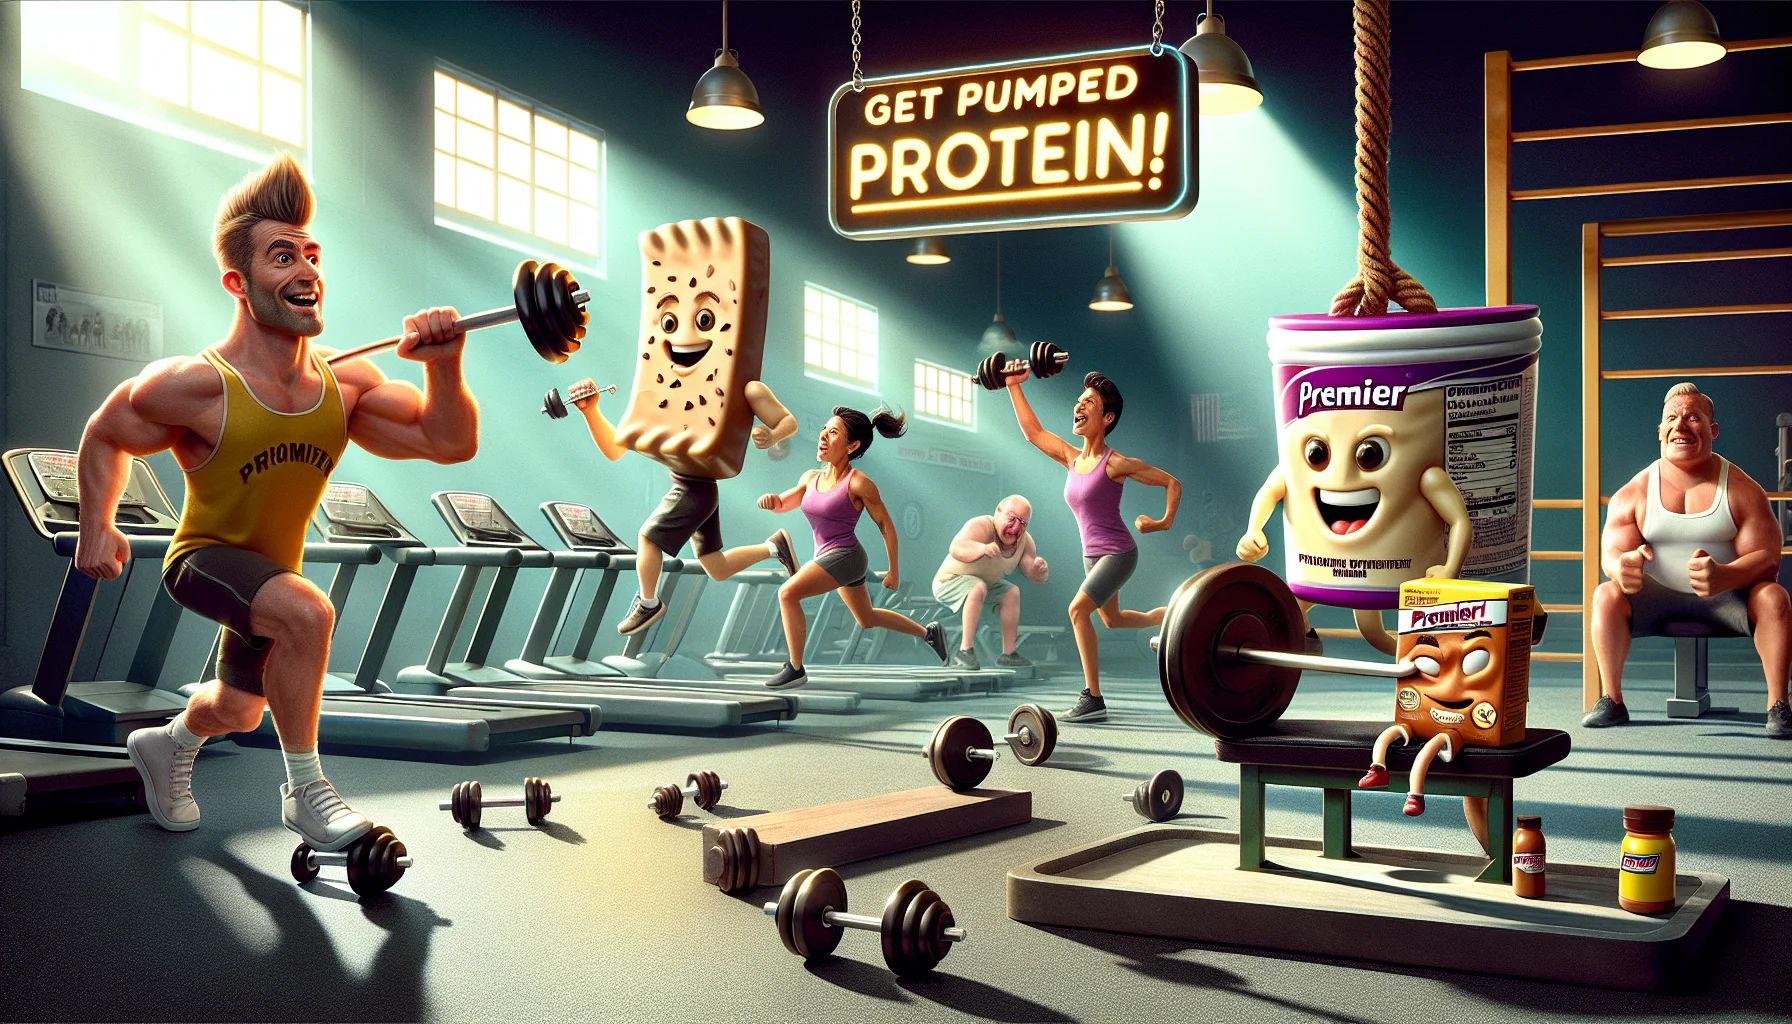 A humorous scenario in vivid and realistic detail. The scene is in a gym, where we see protein bars on a bench lifting miniature barbells, cheerfully motivating the gym-goers. There's a diverse array of people in the background participating in various activities: a tall, blonde Caucasian man, who's jogging on a treadmill with intense look on his face, a Hispanic woman with a ponytail, lifting weights with a determined look in her eyes, and an Asian man with short hair sparring on a punching bag. The words 'Get Pumped with Premier Protein!' float humorously above the glowing protein bars.